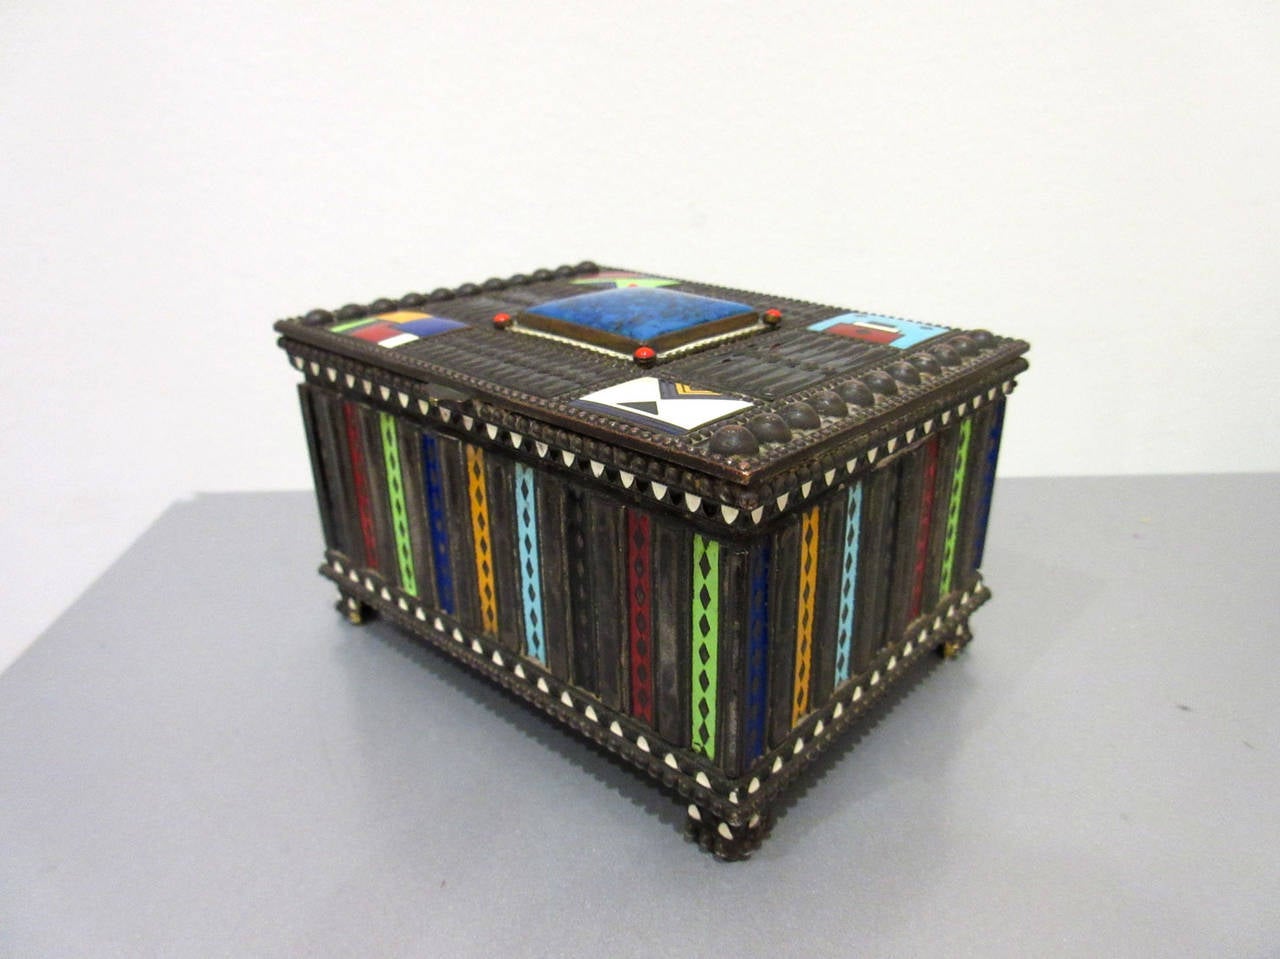 Antique Austrian silvered bronze jewelry box with intricate enamel embellishments. The enamel details are geometric and multicolored individual mini compositions adorning the lid. The interior is lined in original velvet. The box is marked on the